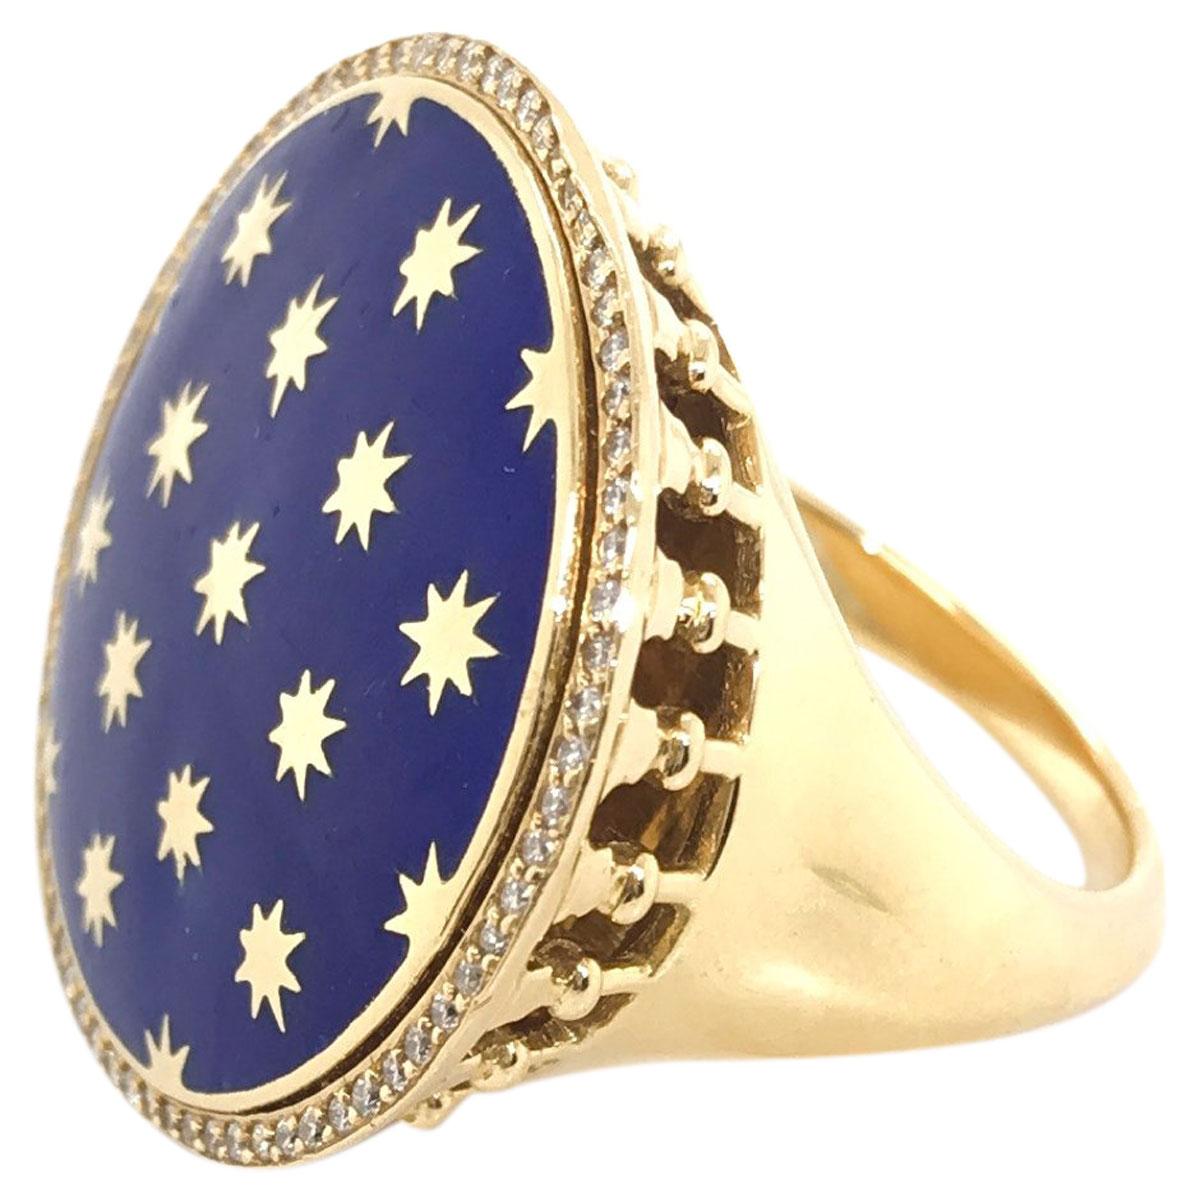 An amazing ring, an amazing look on the hand and oh so collectible! This beautiful ring is from the Venezia Stella range by Paloma Picasso for Tiffany & Co. It features a royal blue enamel disc that has a diameter of 1.011 inches so it's a big look